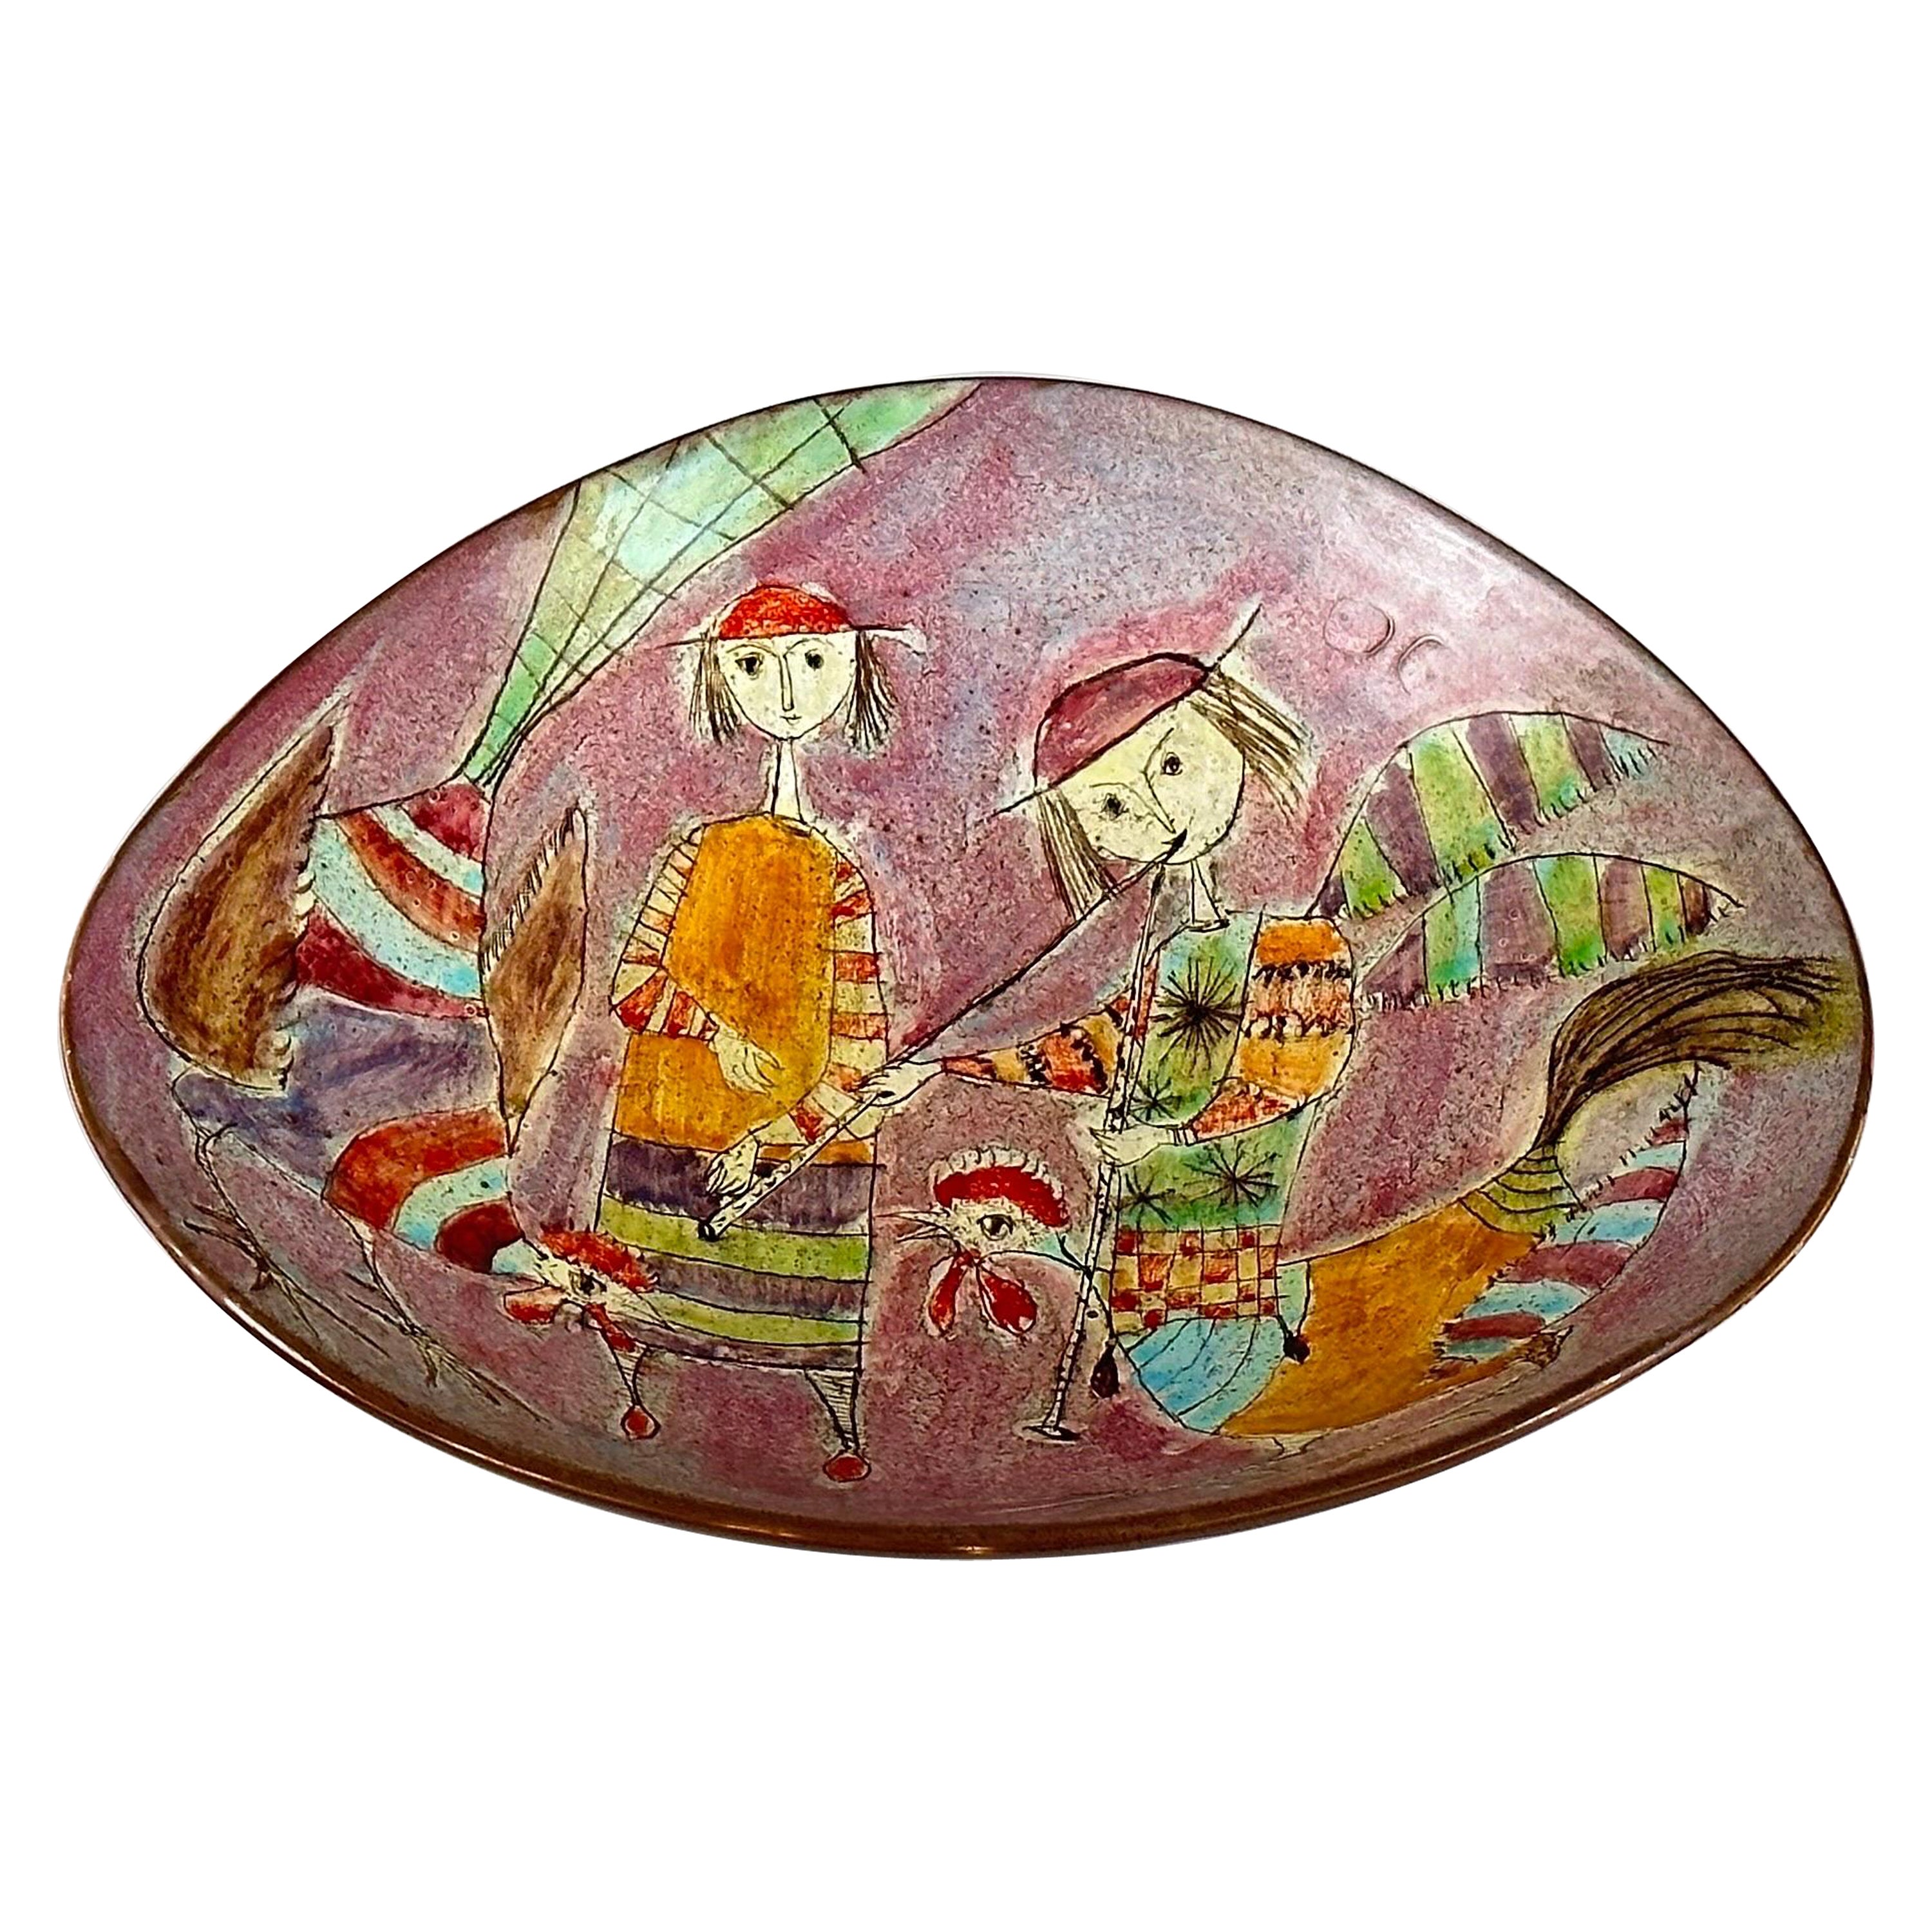 Whimsical Hand-Painted Ceramic Plate by Baratti Pesaro, 1970s 